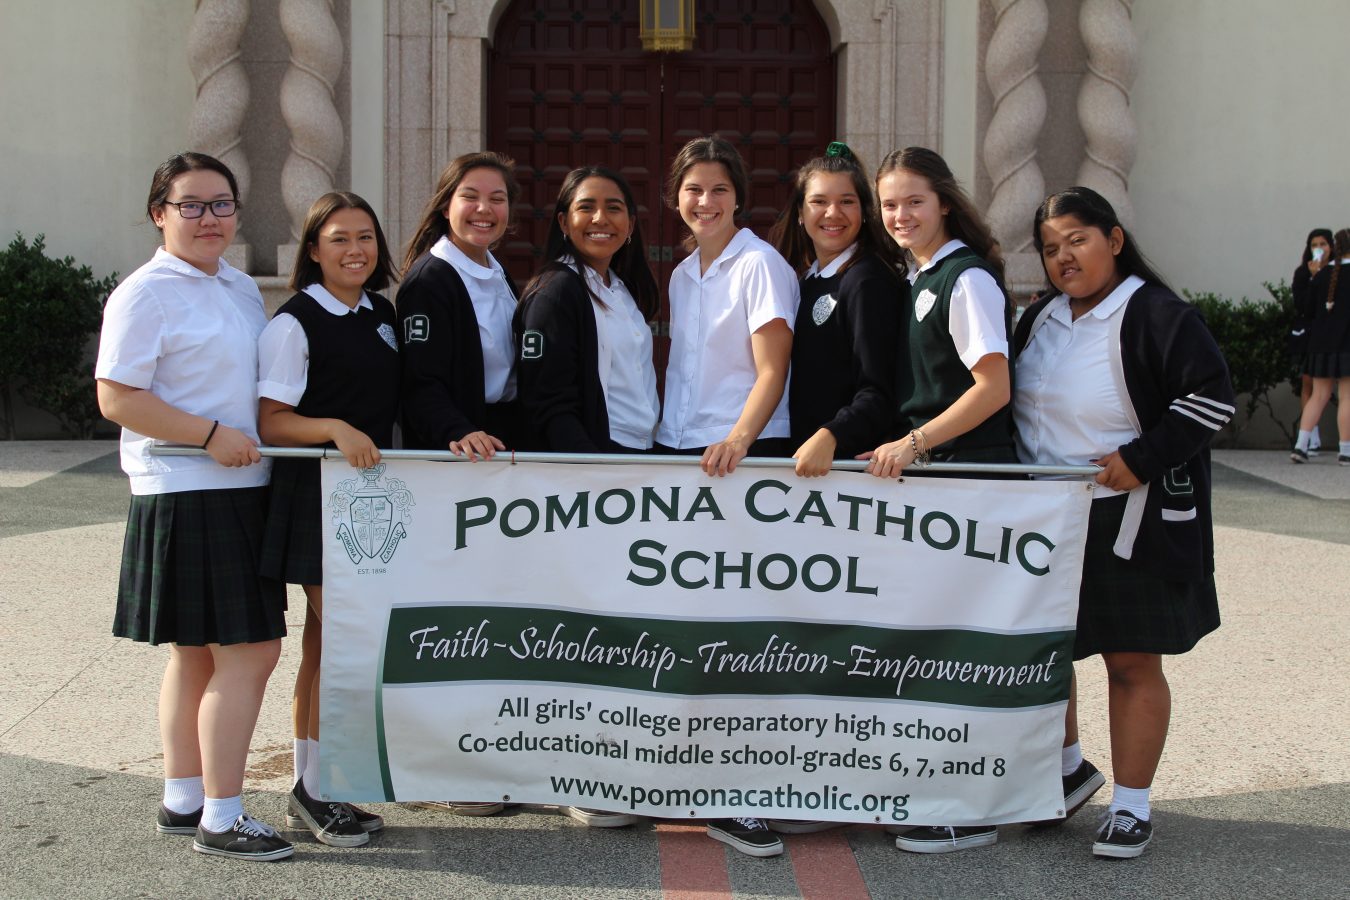 Carrying the light of faith for 120 years at Pomona Catholic school